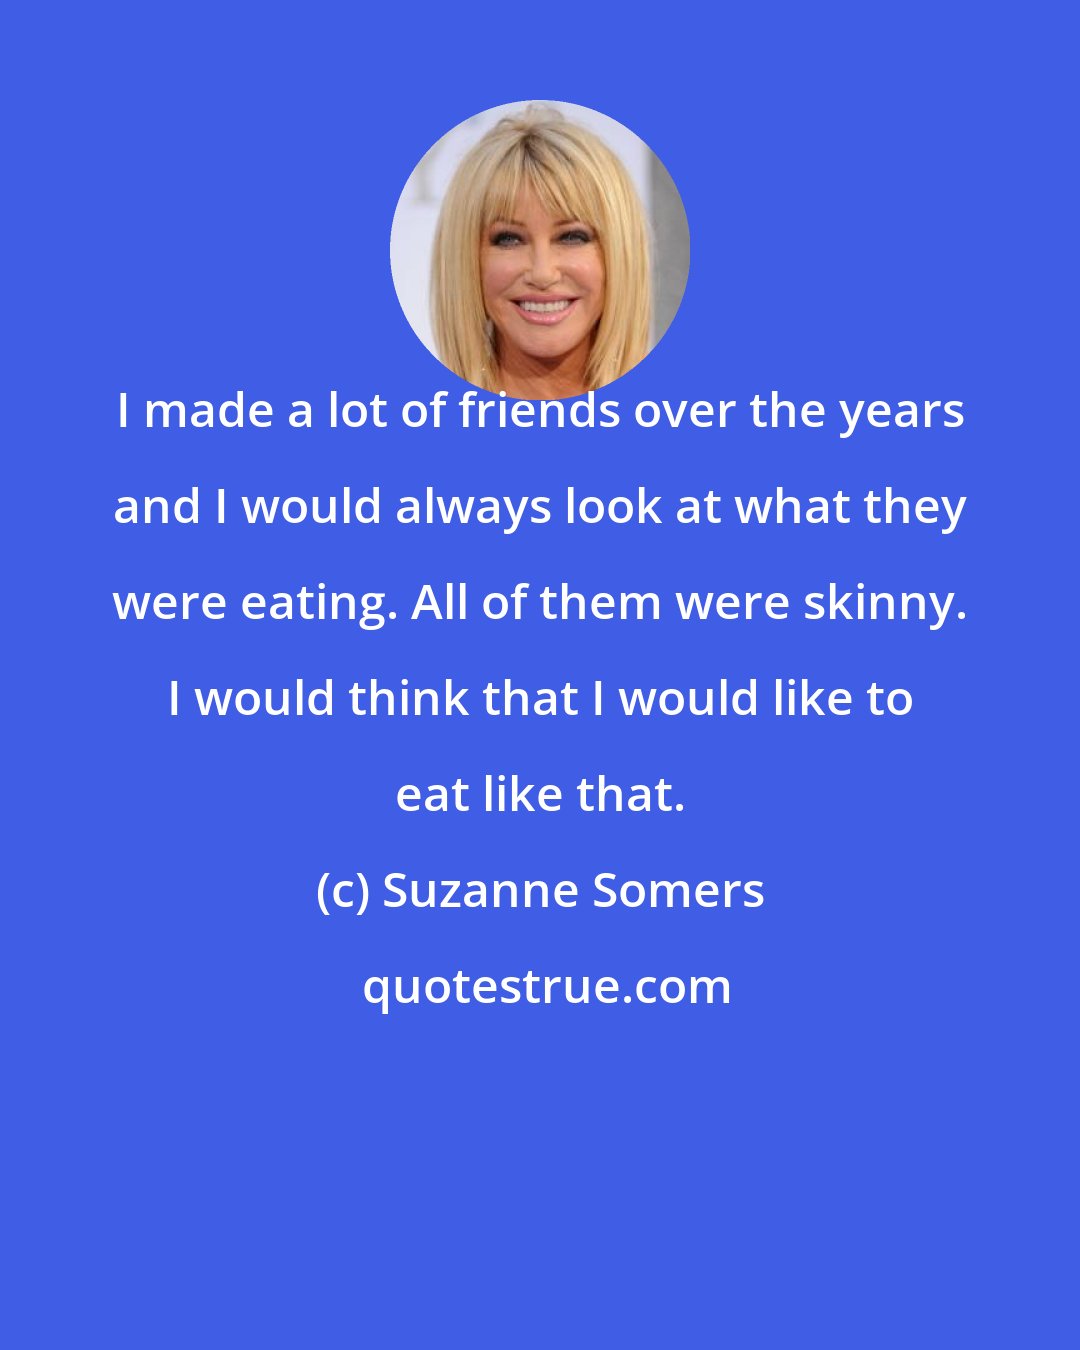 Suzanne Somers: I made a lot of friends over the years and I would always look at what they were eating. All of them were skinny. I would think that I would like to eat like that.